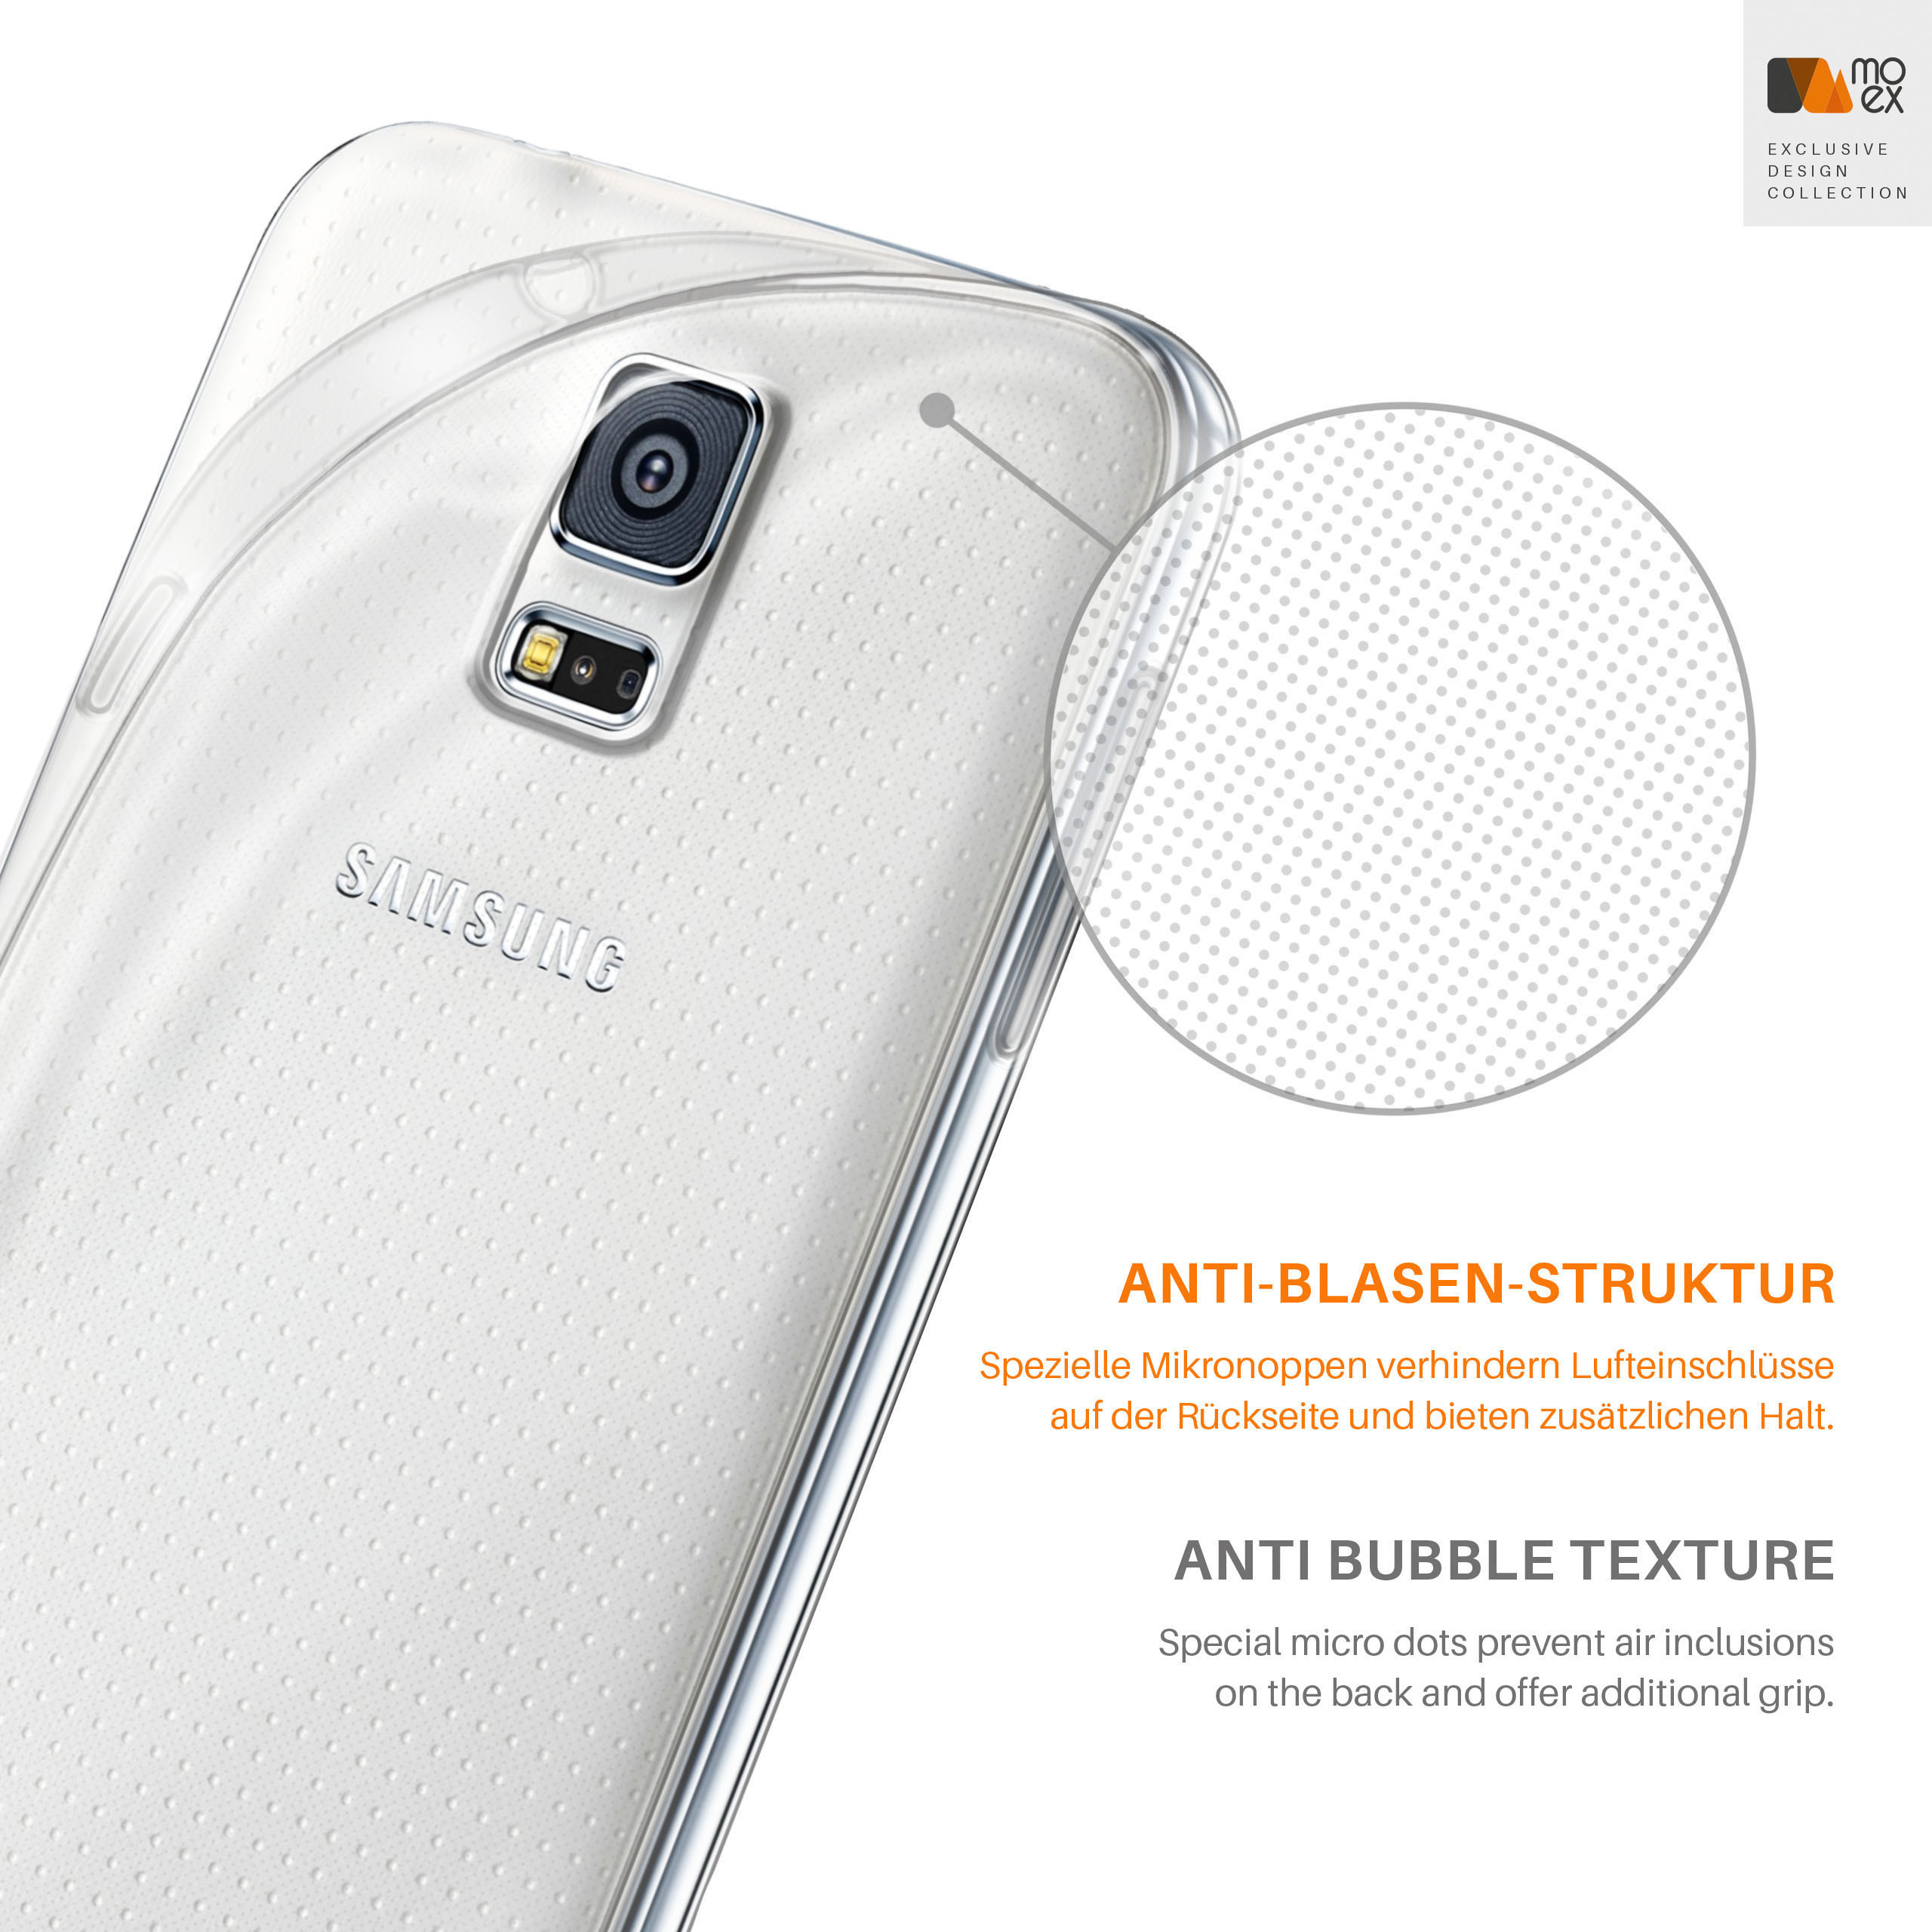 Neo, Backcover, Aero S5 S5 / Crystal-Clear Samsung, Galaxy MOEX Case,